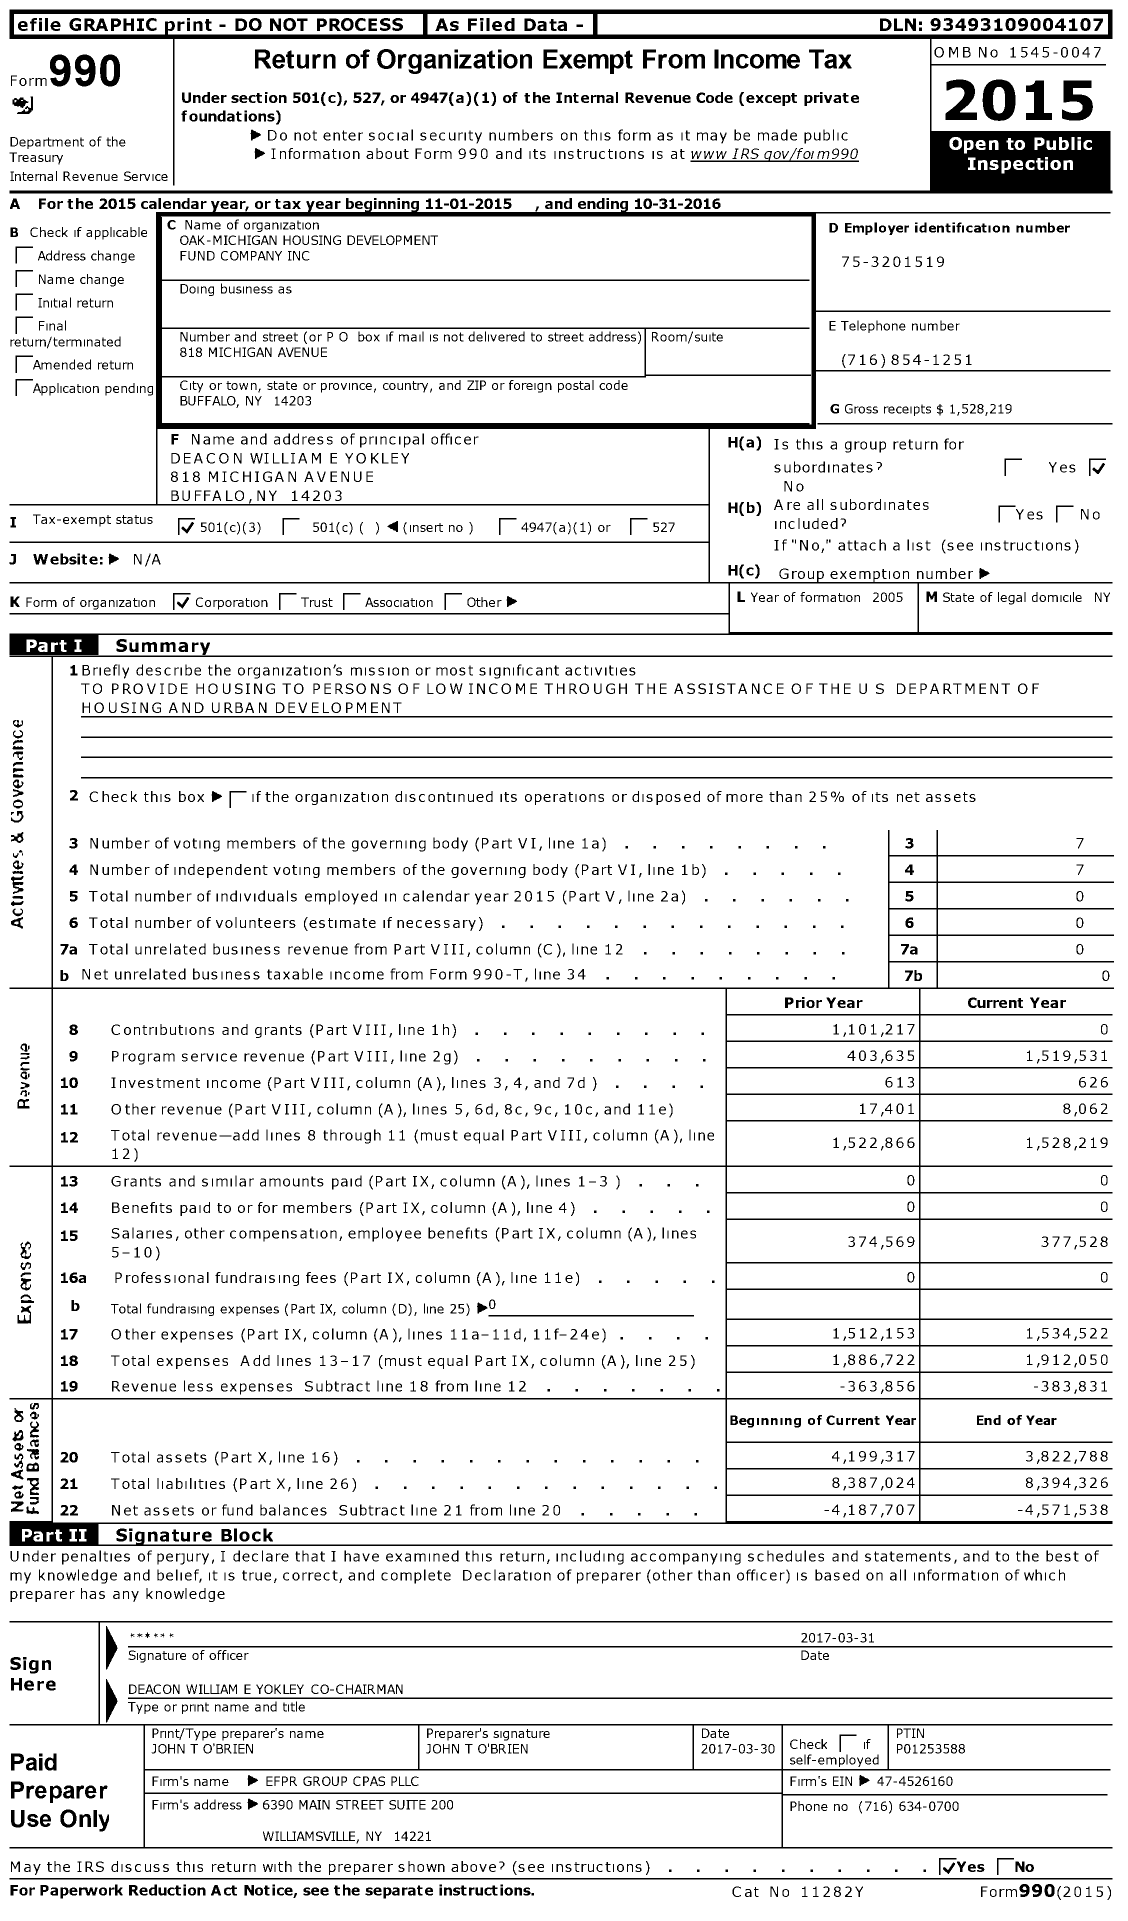 Image of first page of 2015 Form 990 for Oak-Michigan Housing Development Fund Company